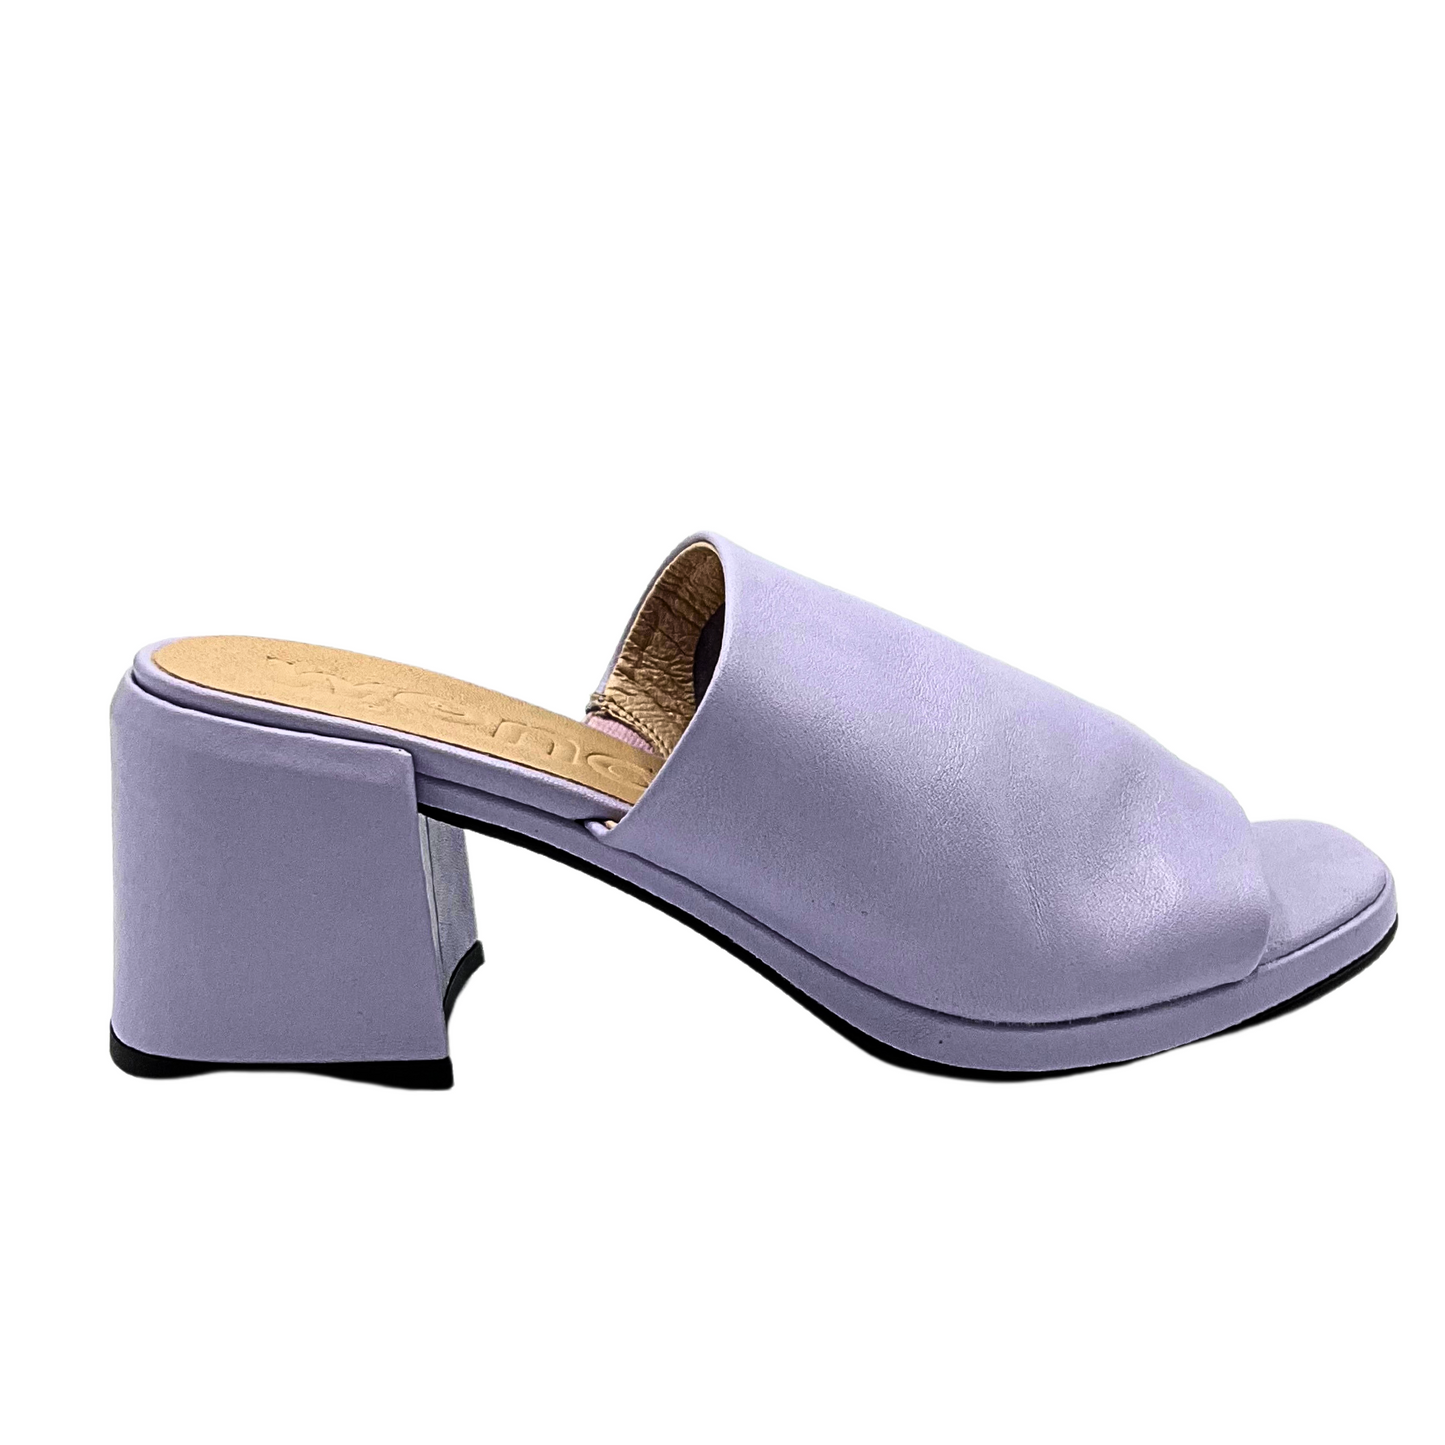 Inside view of lavender leather mule.  Open toe